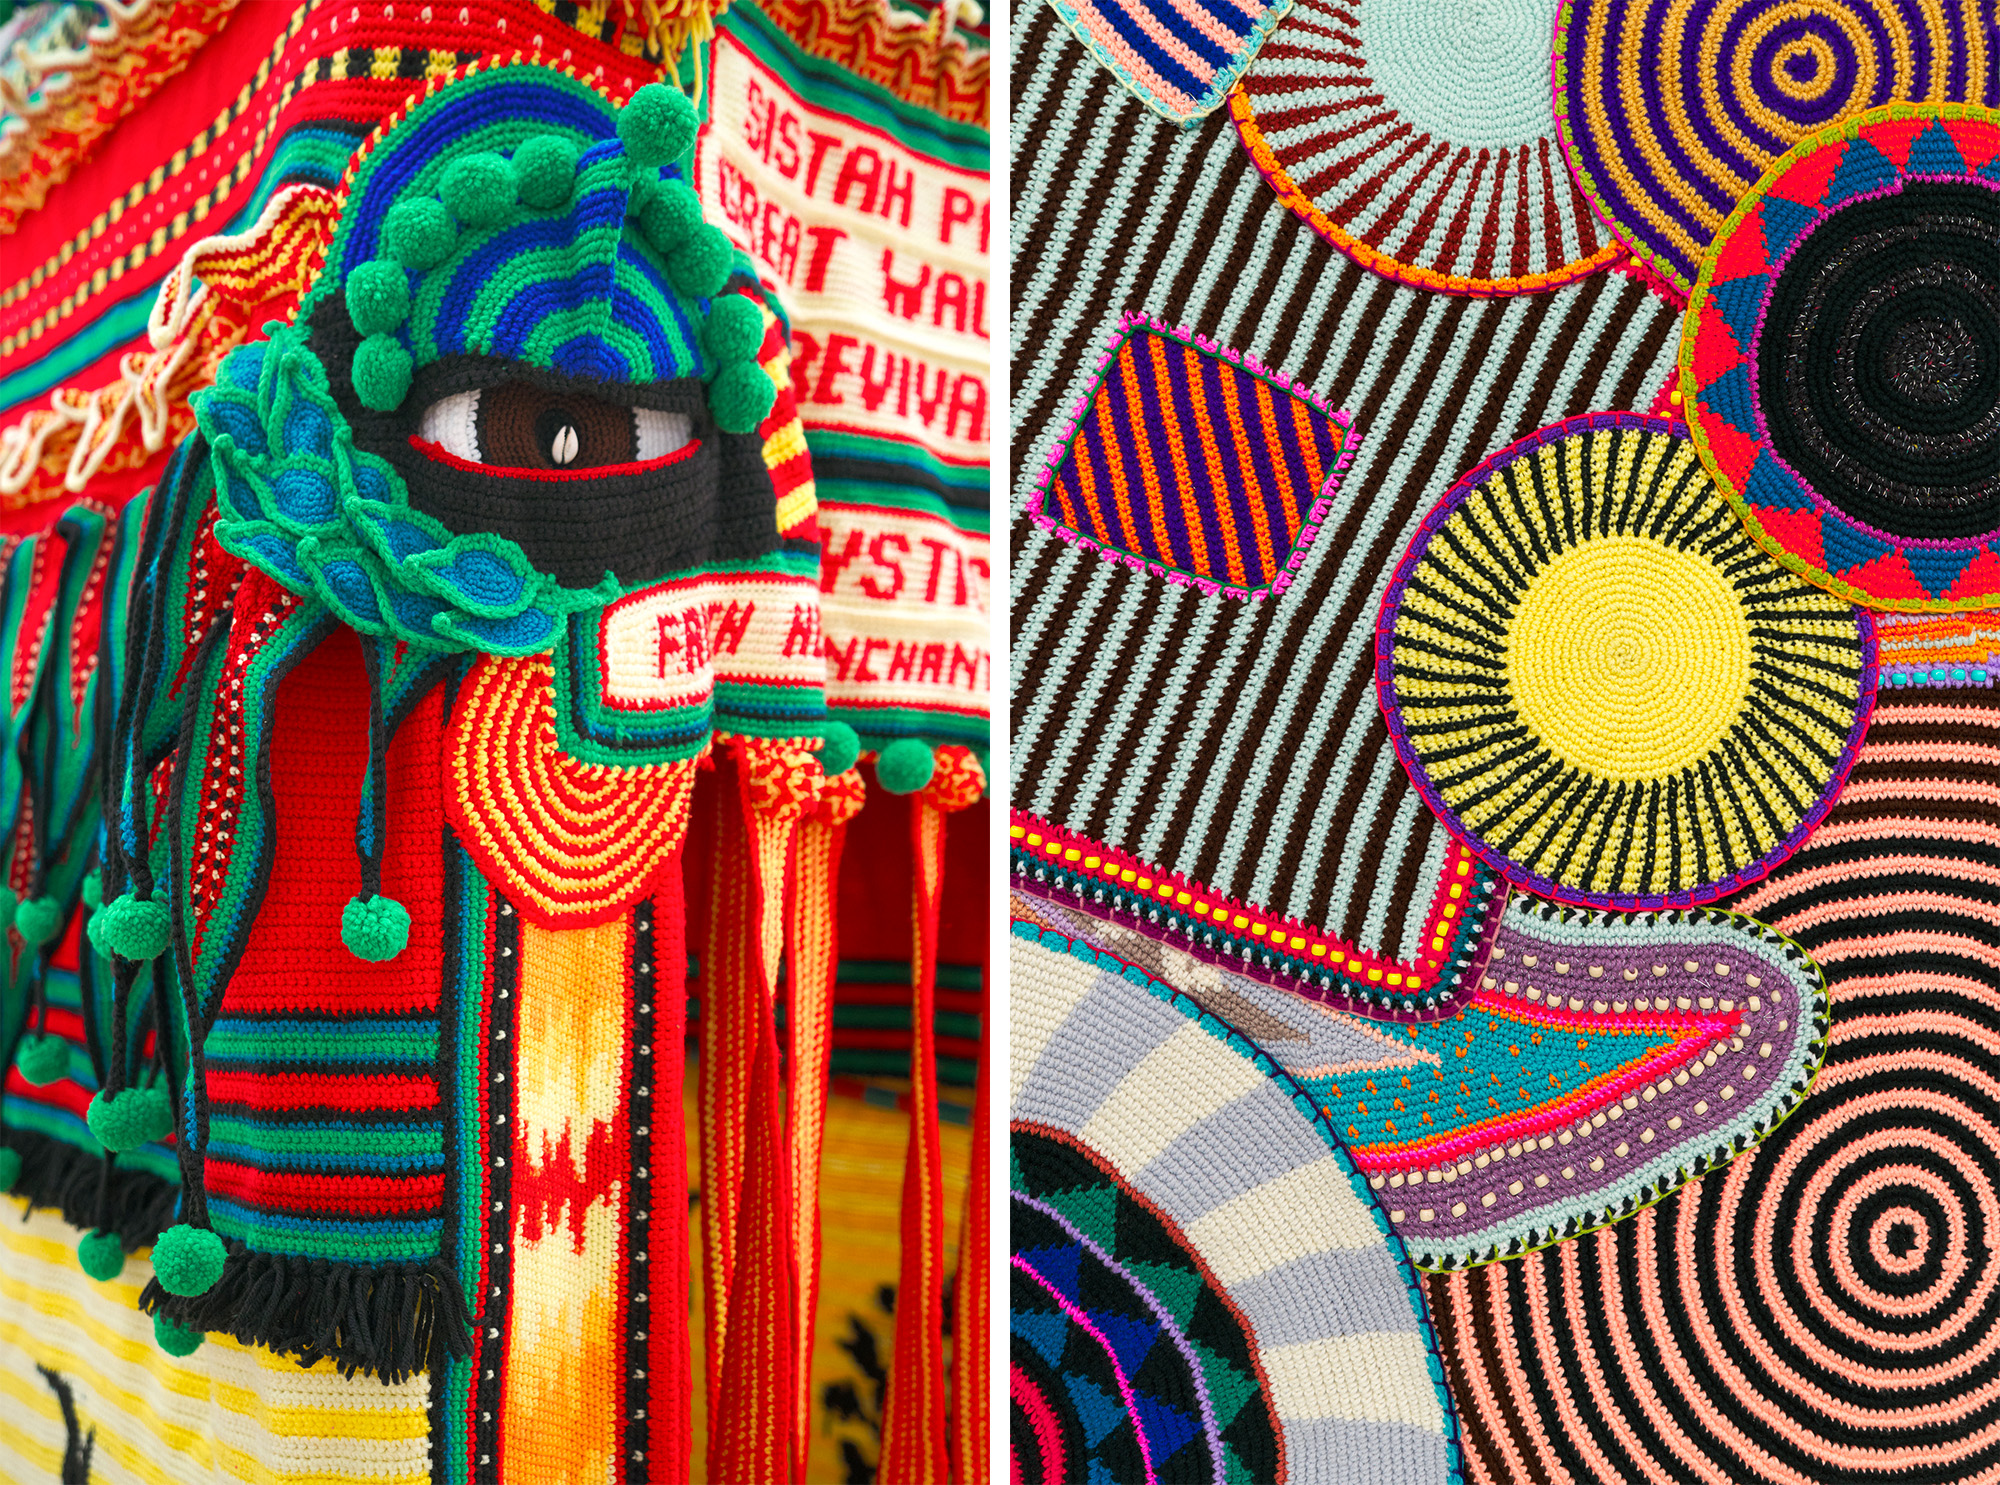 two side-by-side images showing abstract details of colorful crochet